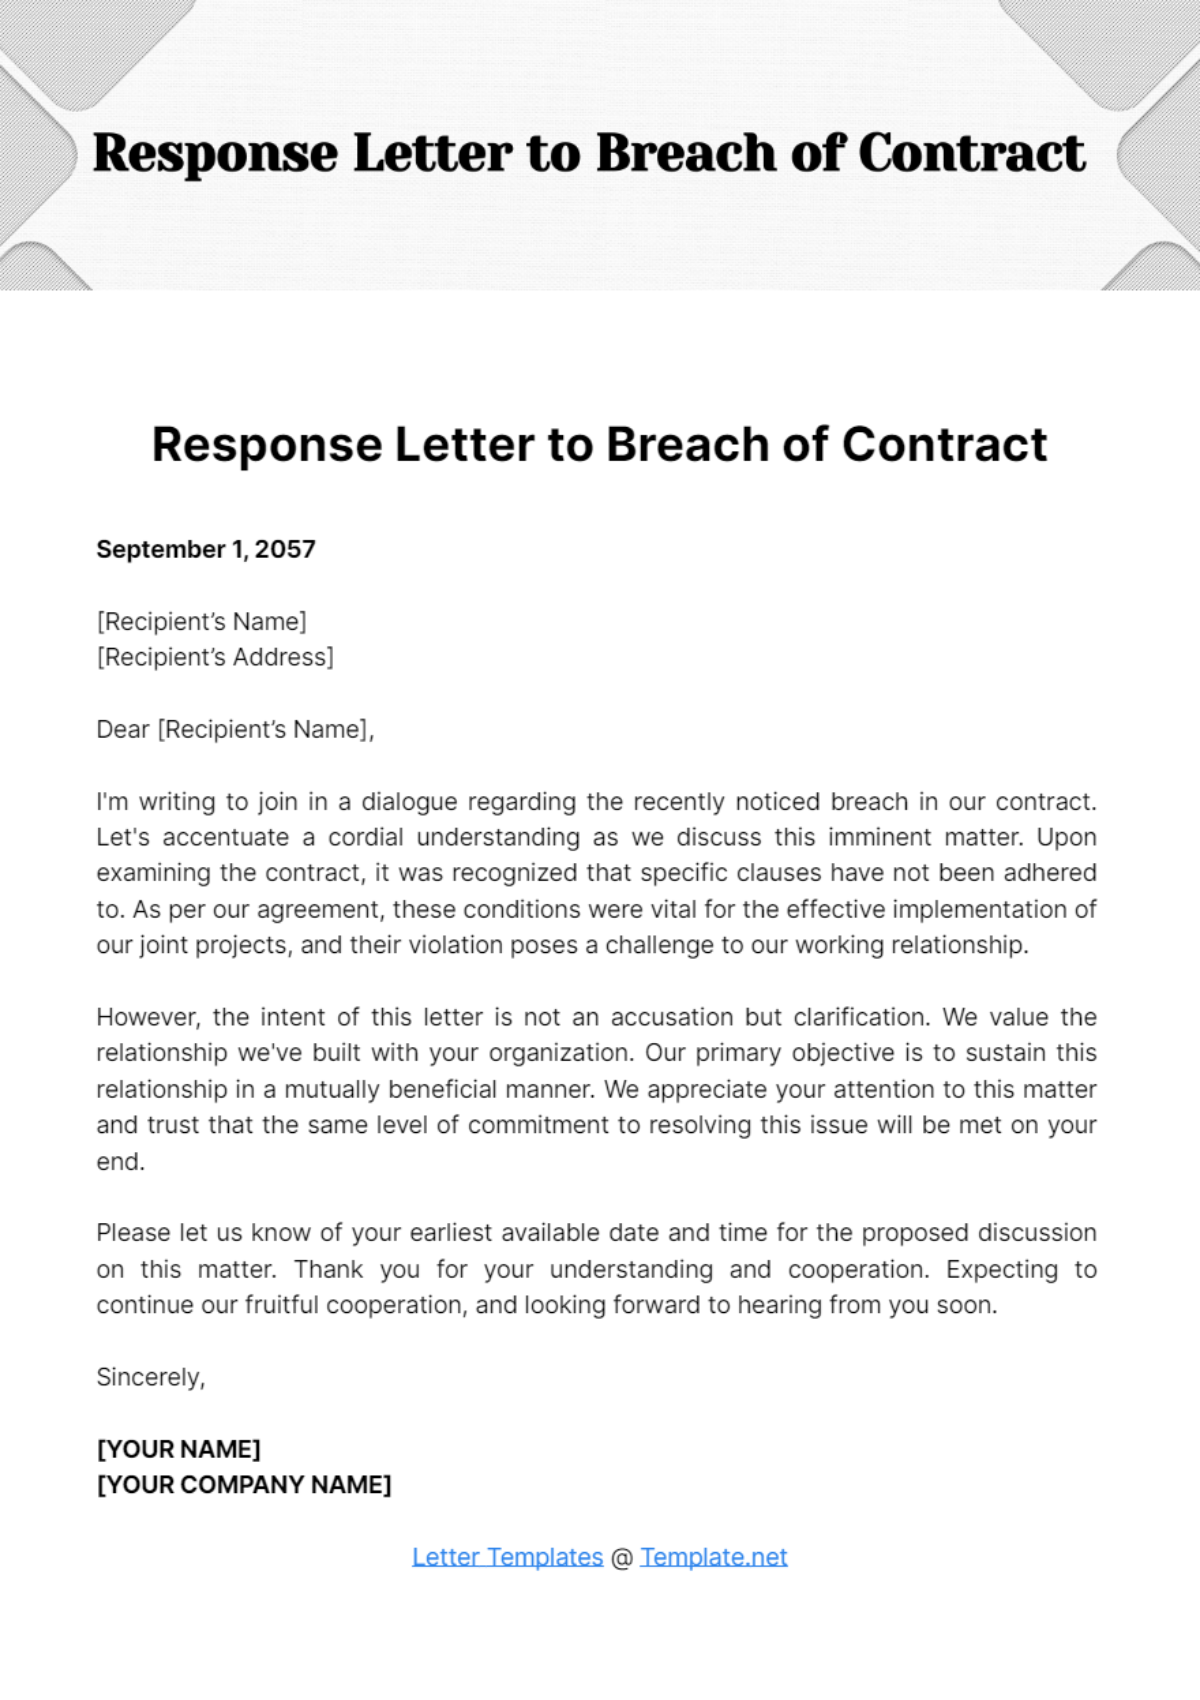 Response Letter to Breach of Contract Template